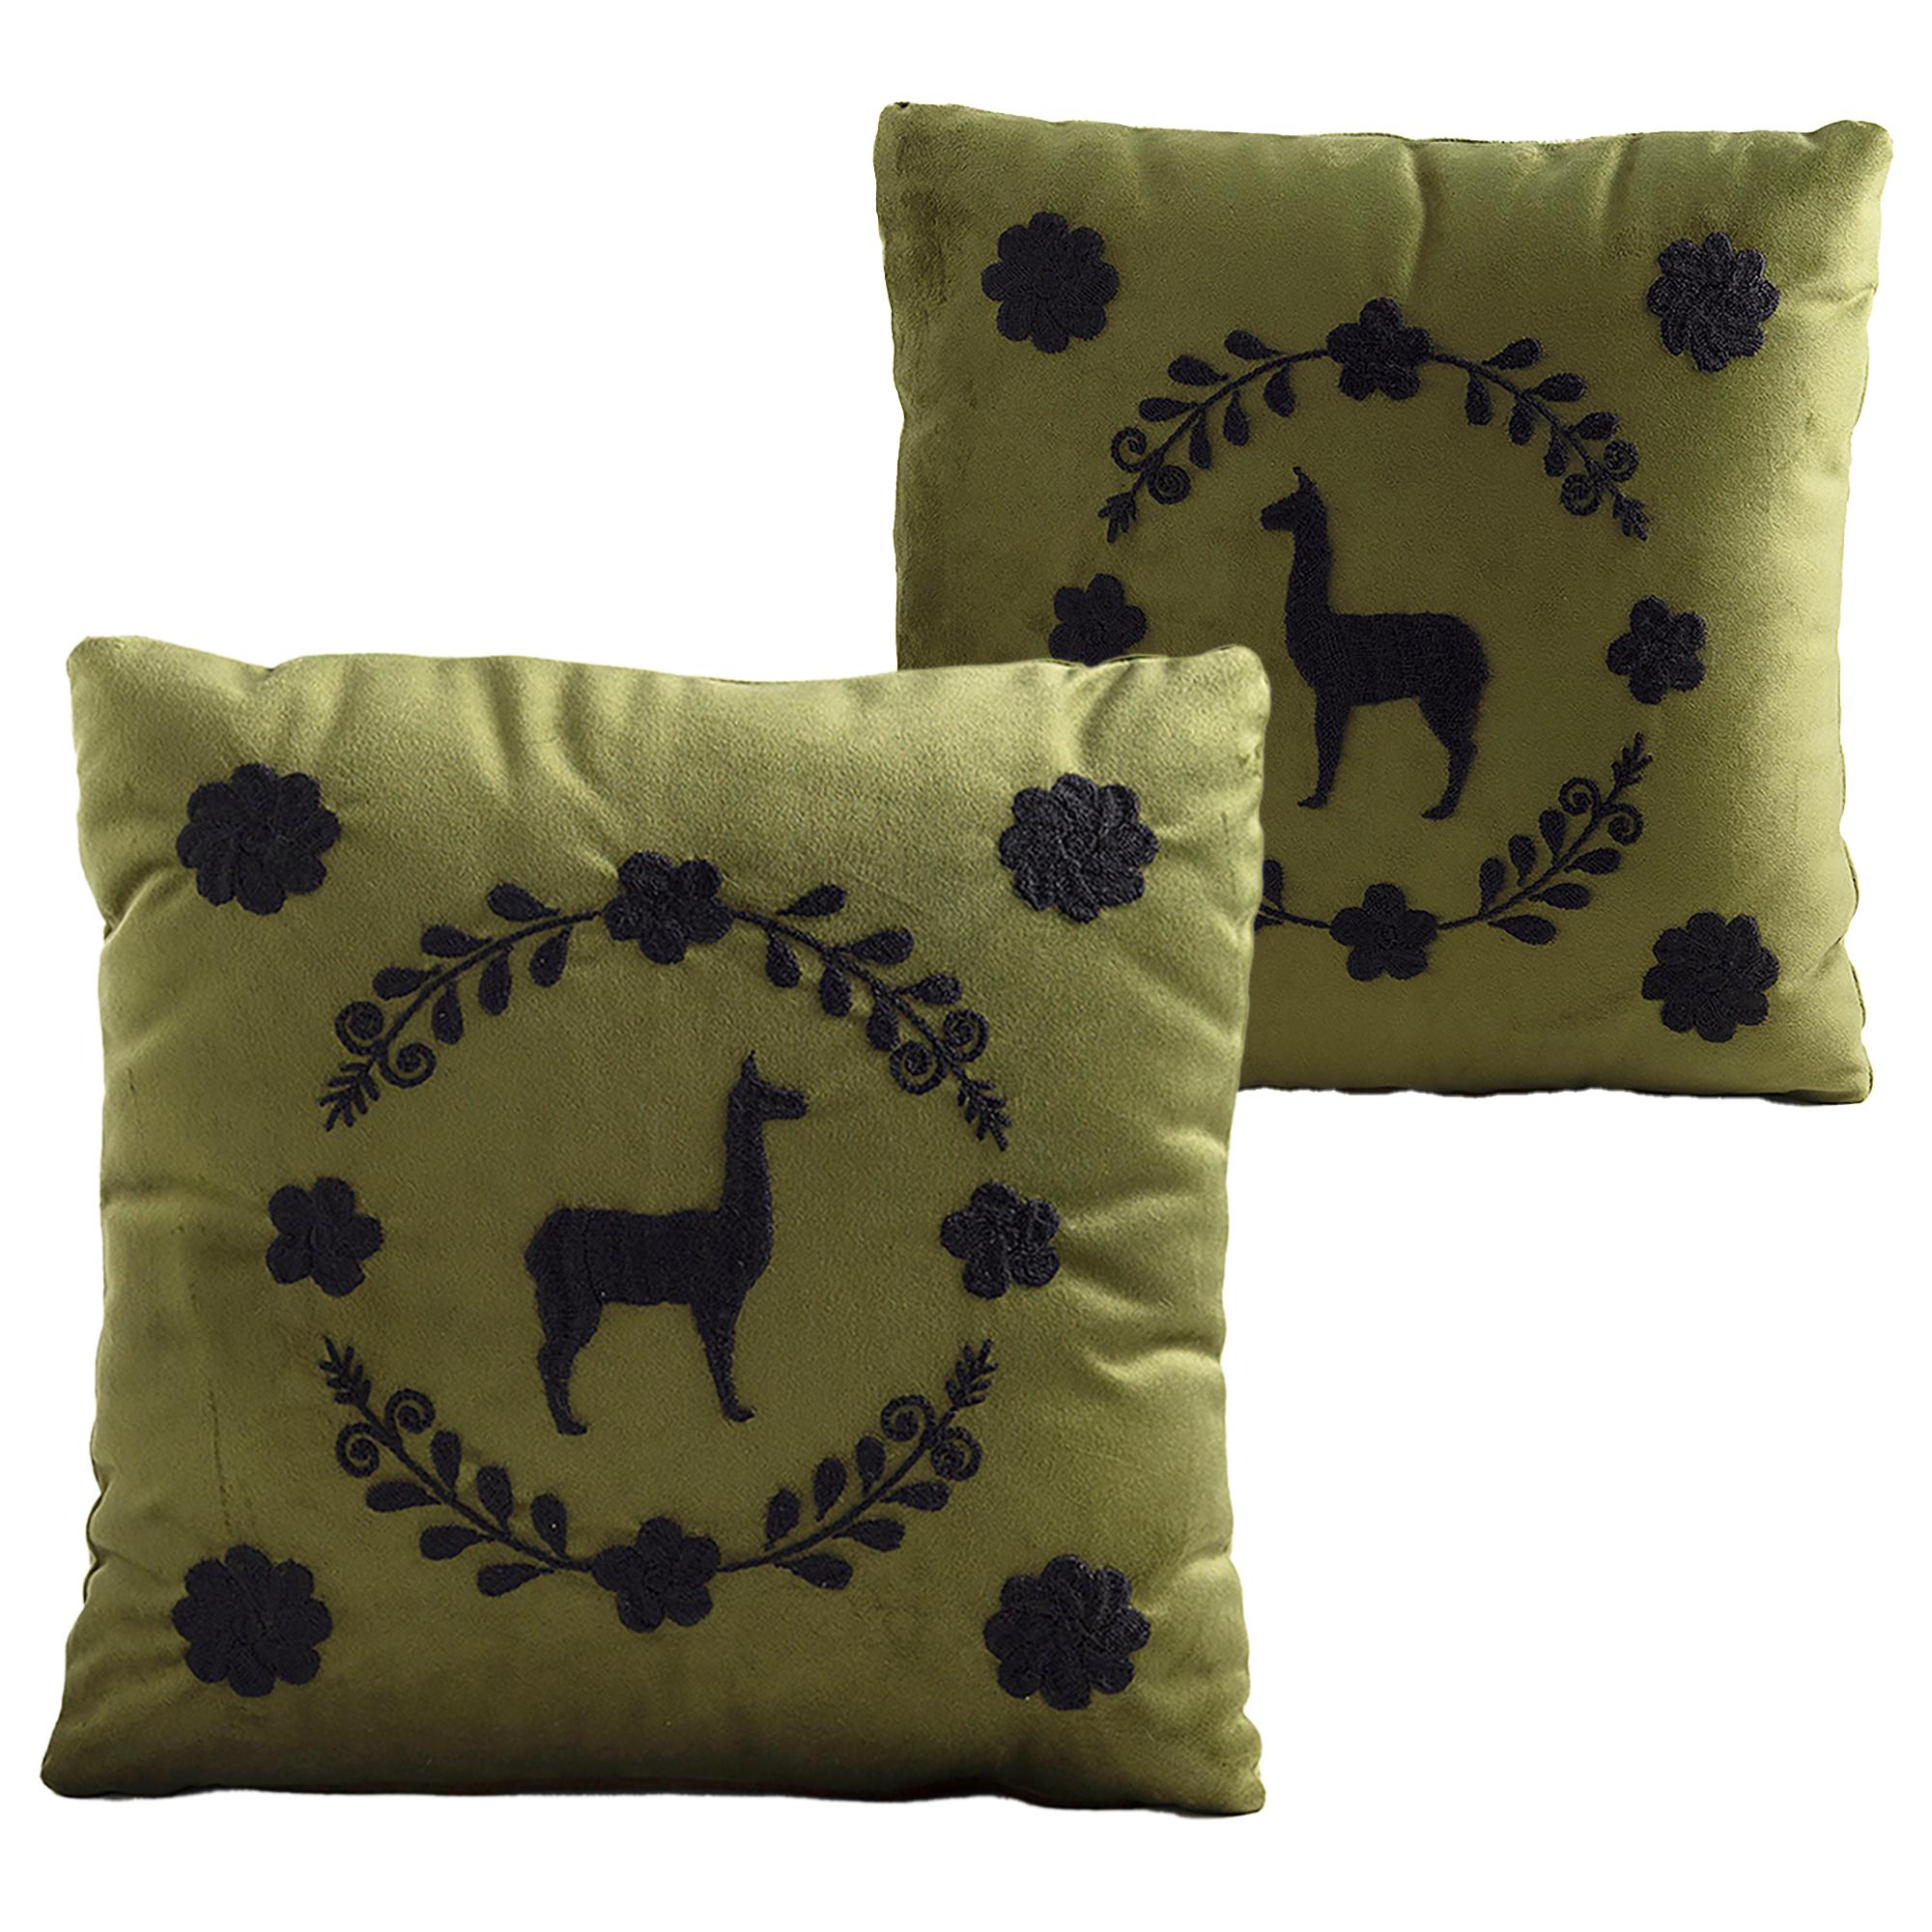 LLAMA Hand Embroidered Decorative Pillows in Olive Velvet by ANDEAN, Set of 2 For Sale